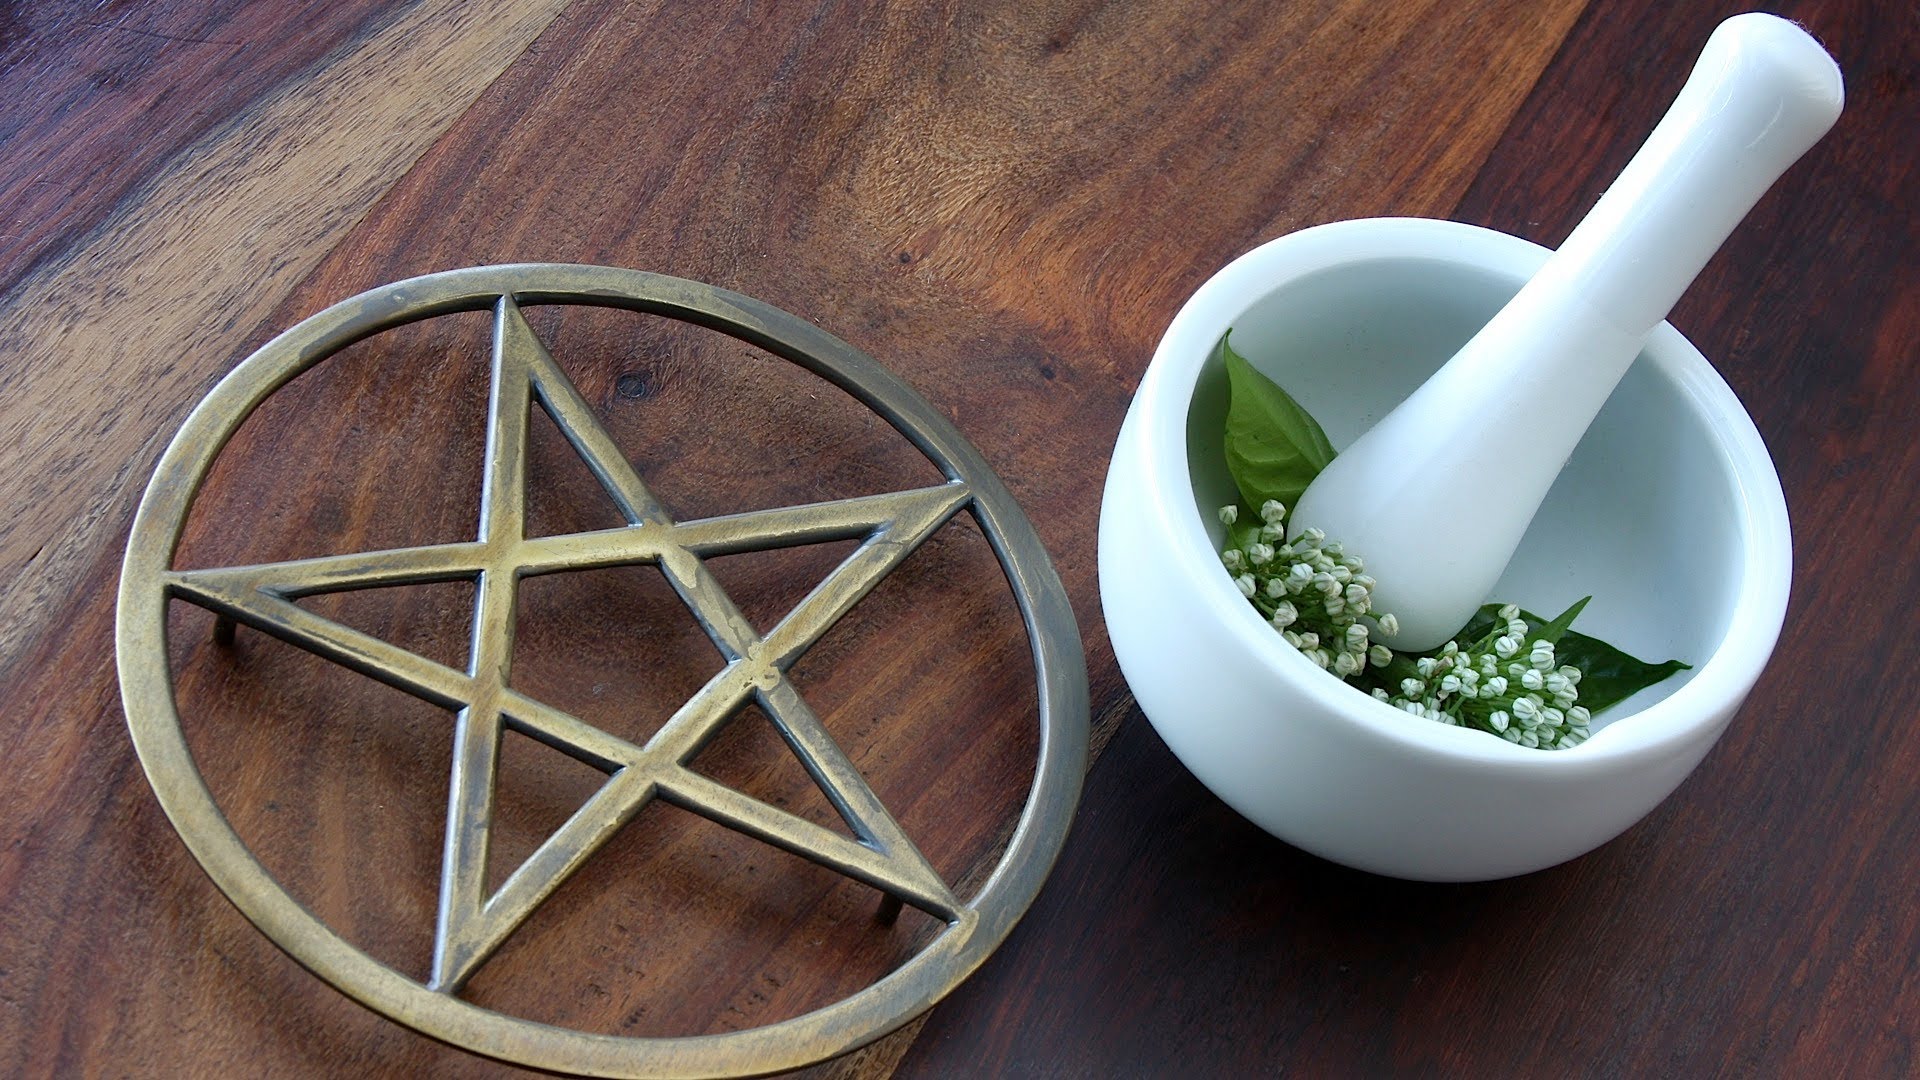 How to Break Witchcraft and Get Rid of Curses [without them coming back]